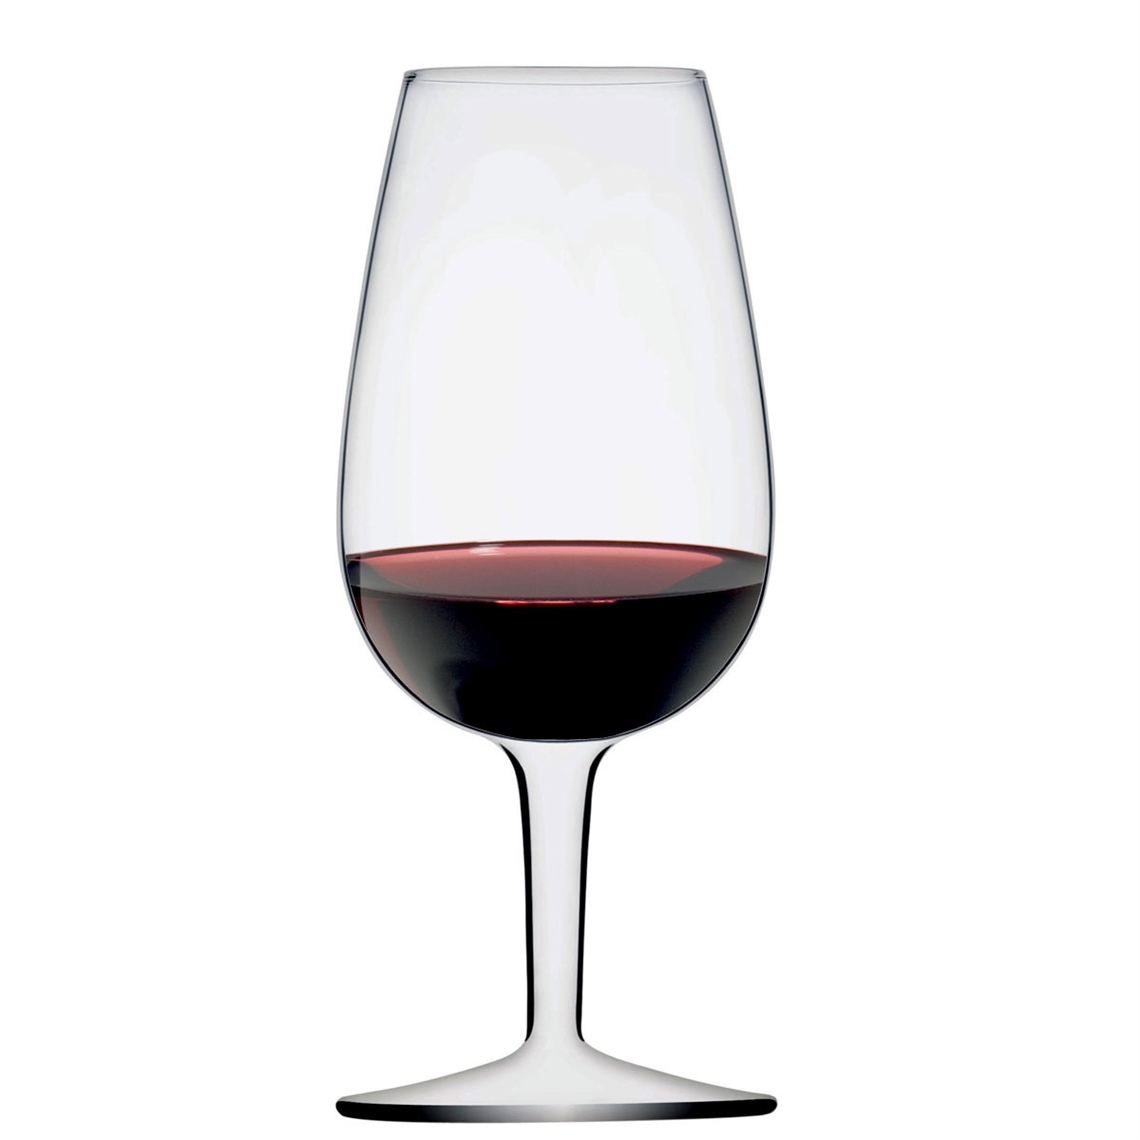 View more pulltex from our Wine Tasting Glasses range